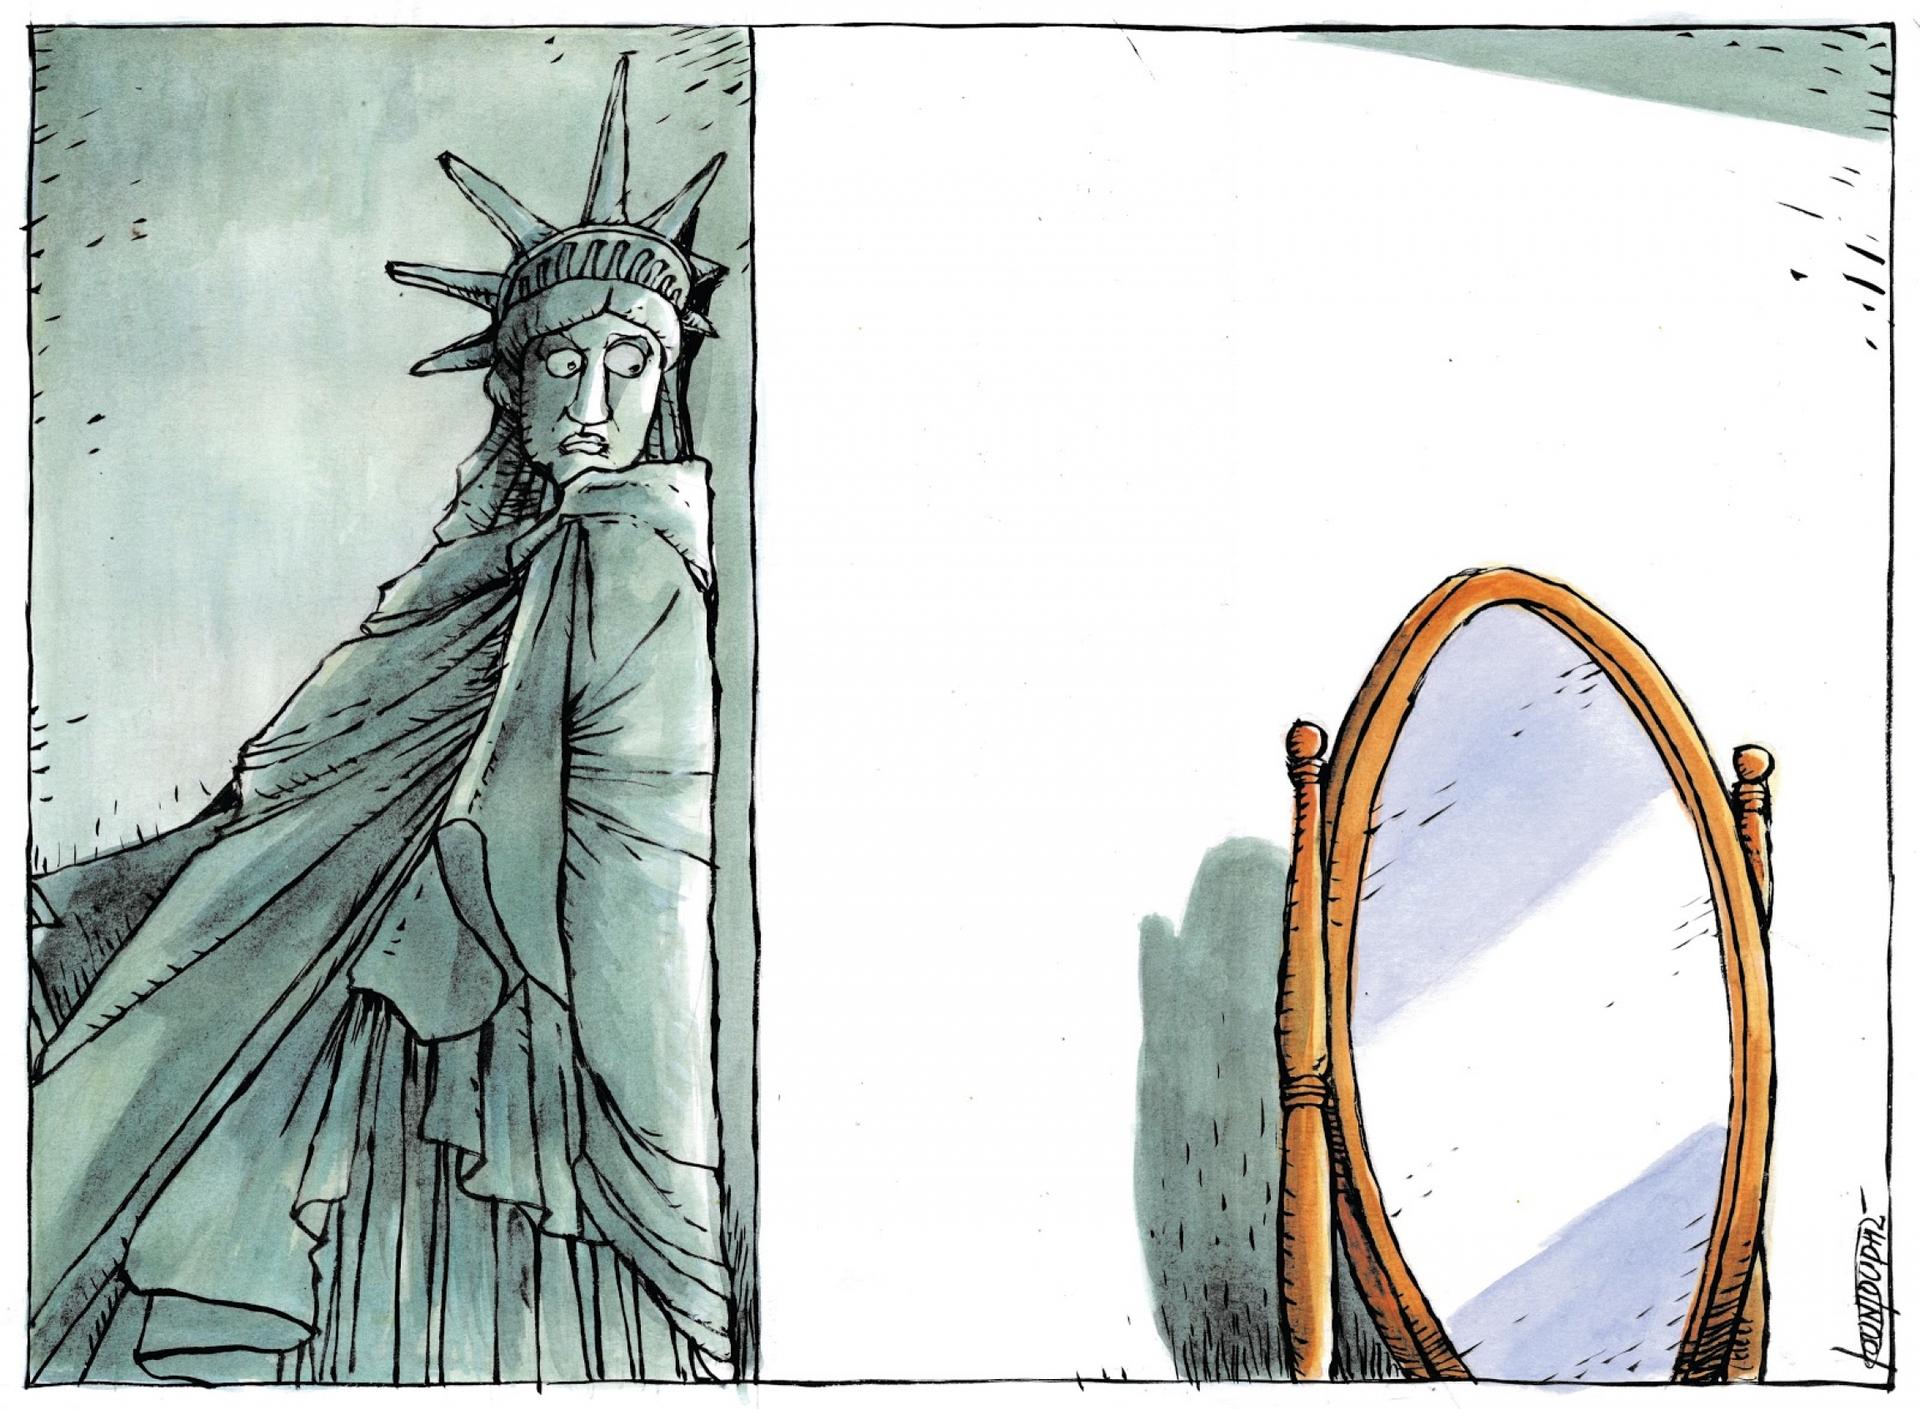 Statue of liberty is afraid to look in the mirror